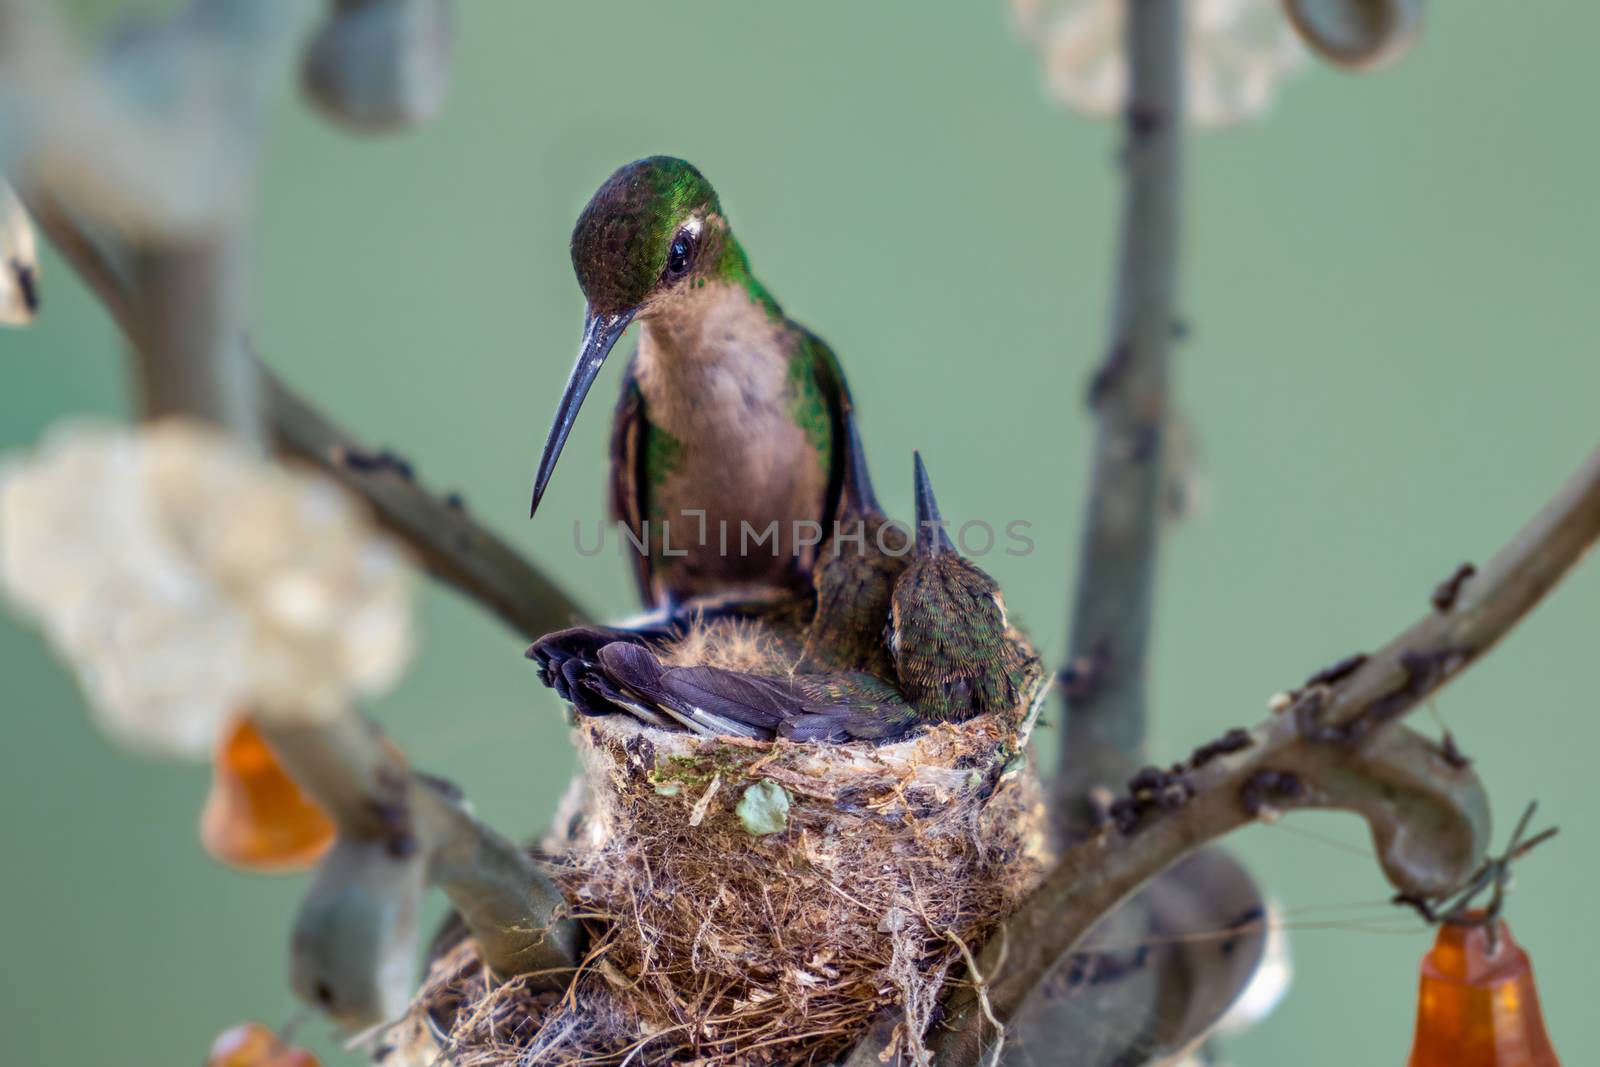 Adult hummingbird in the nest with its two young. The nest is made in a lamp